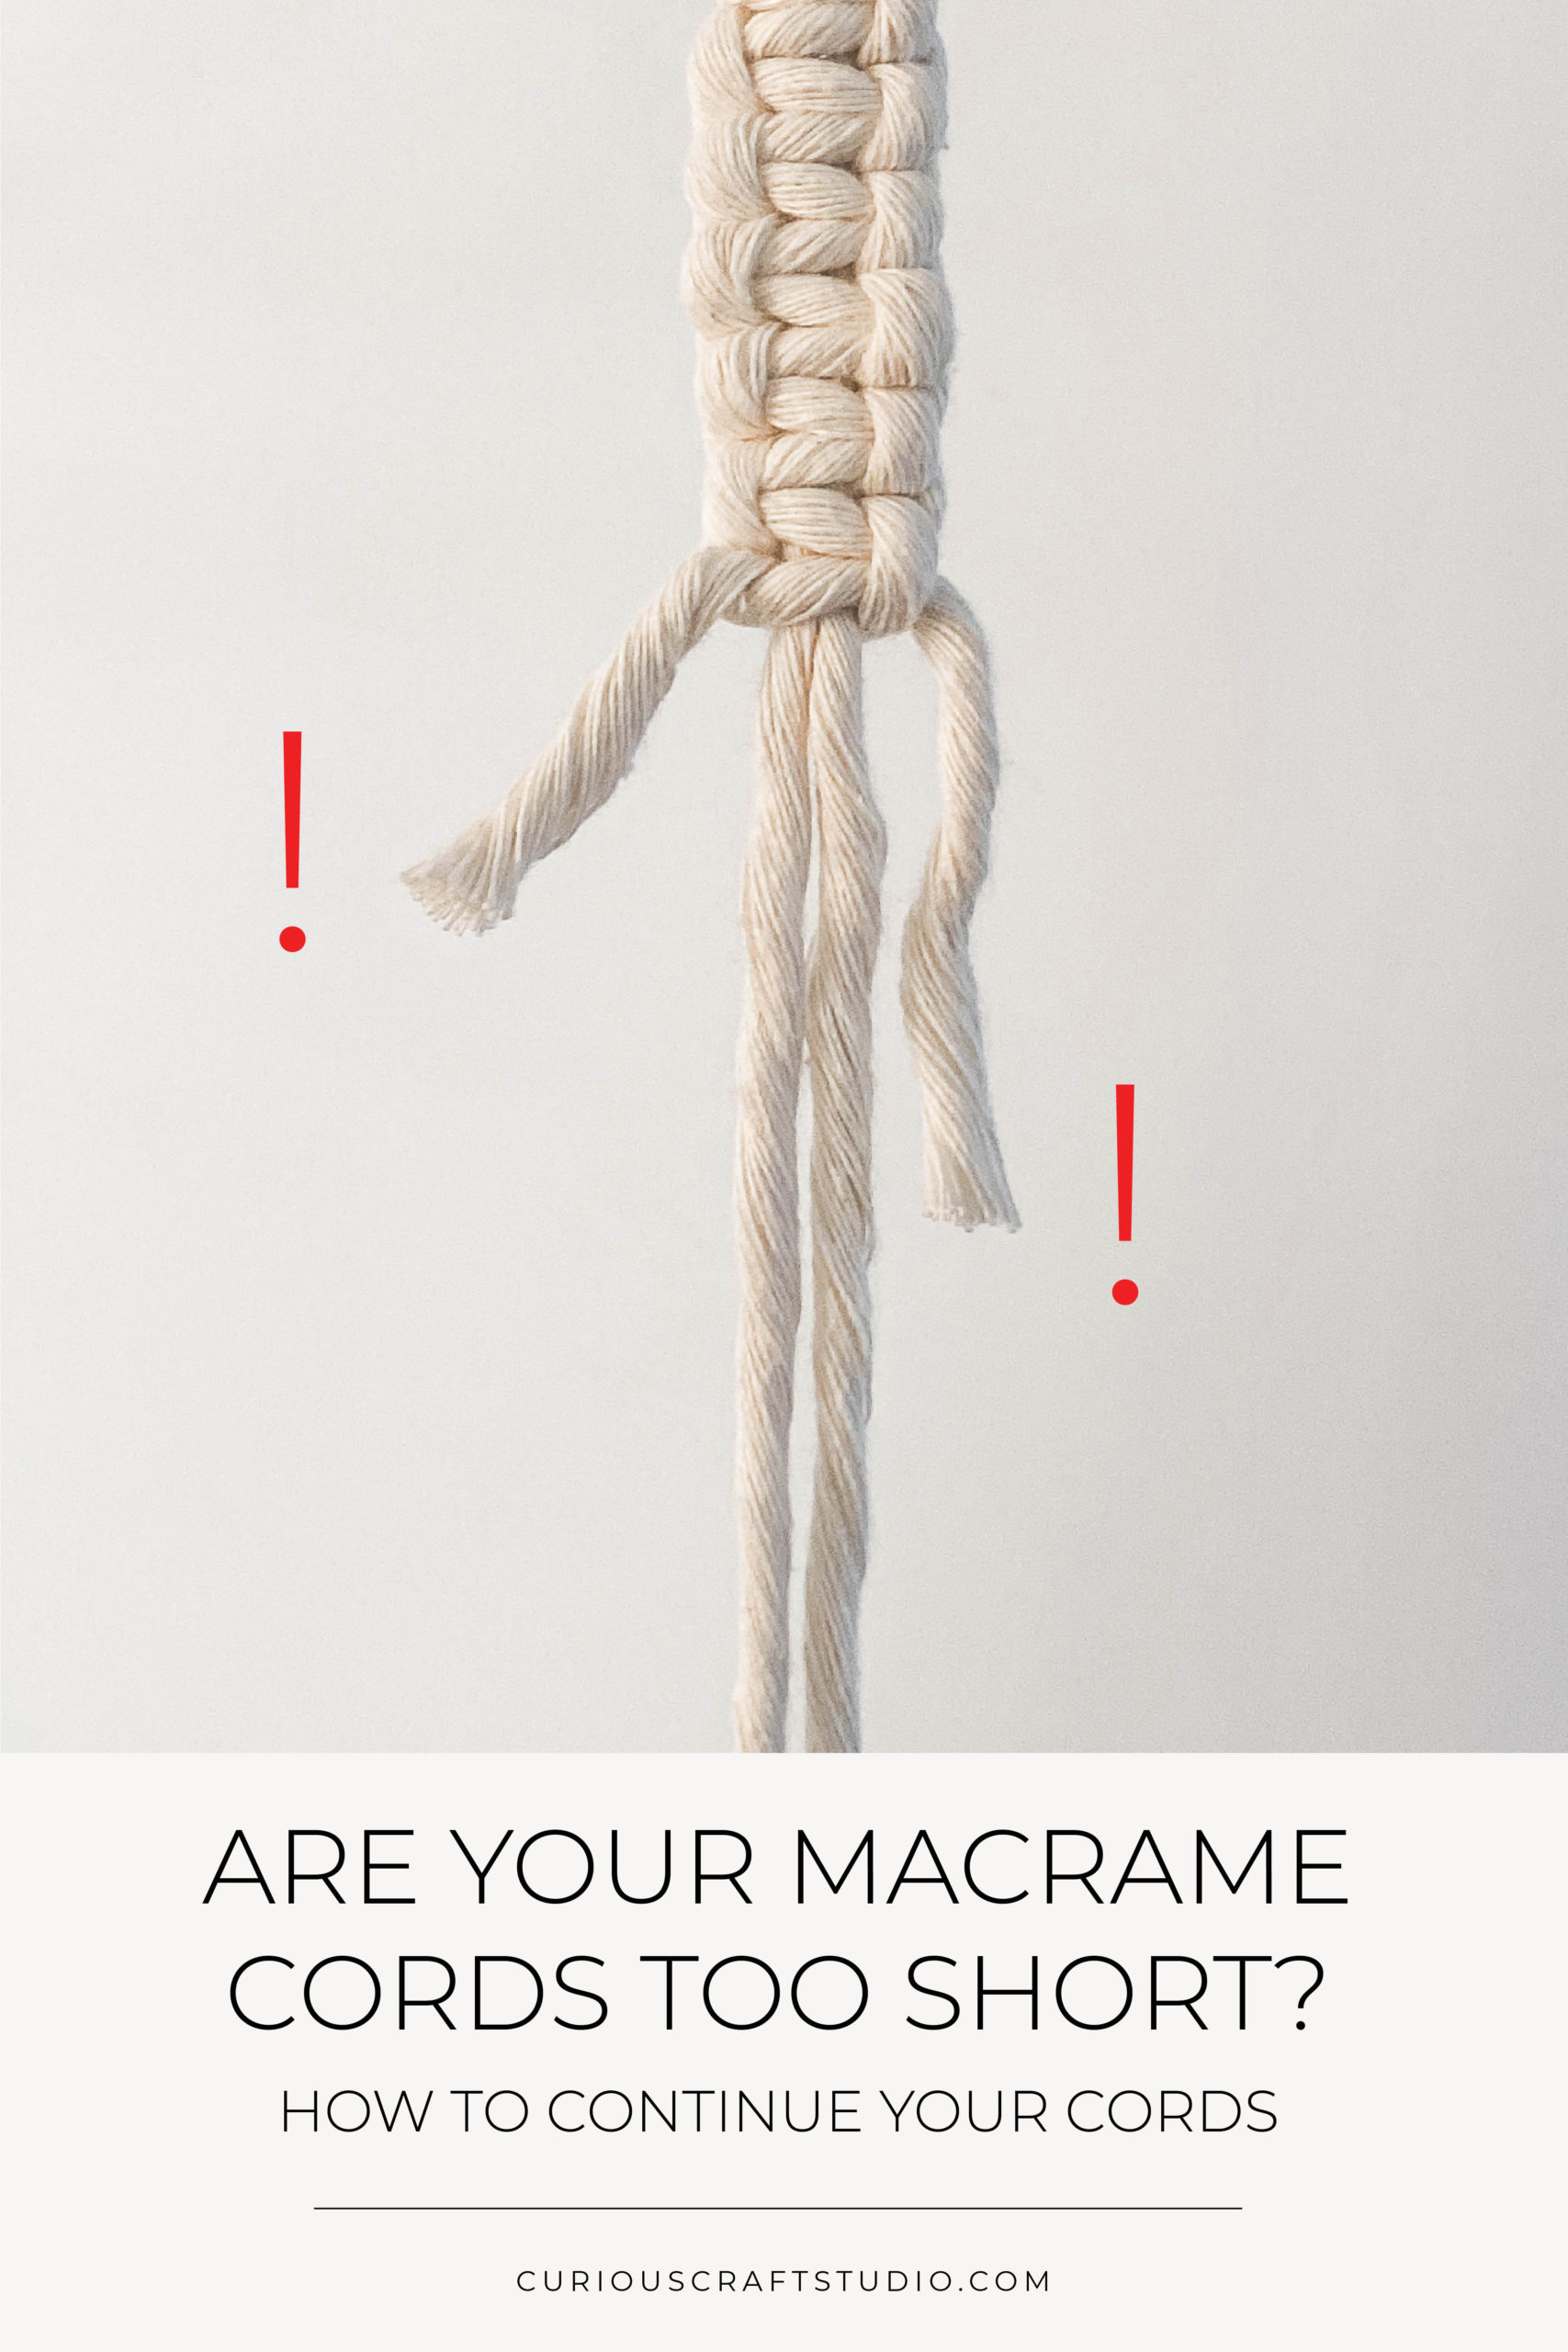 Macrame cord too short? How to continue your cord?